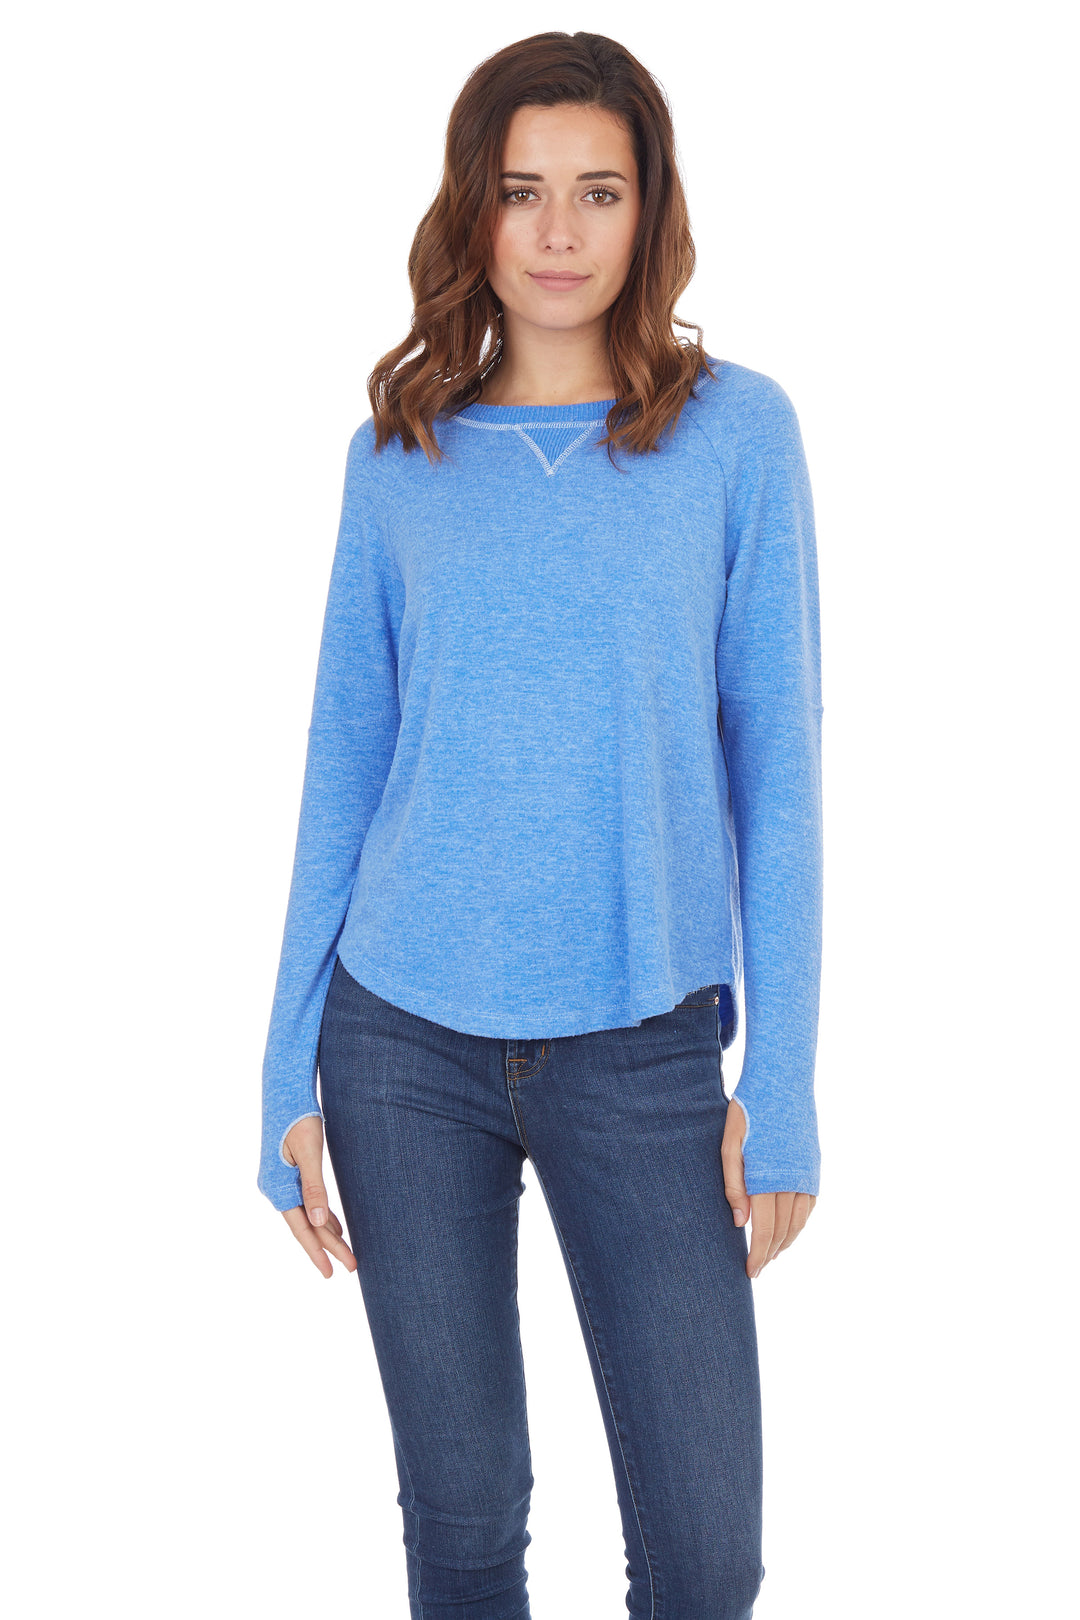 Aqua Heather Knit Top With Thumbhole - Kingfisher Road - Online Boutique